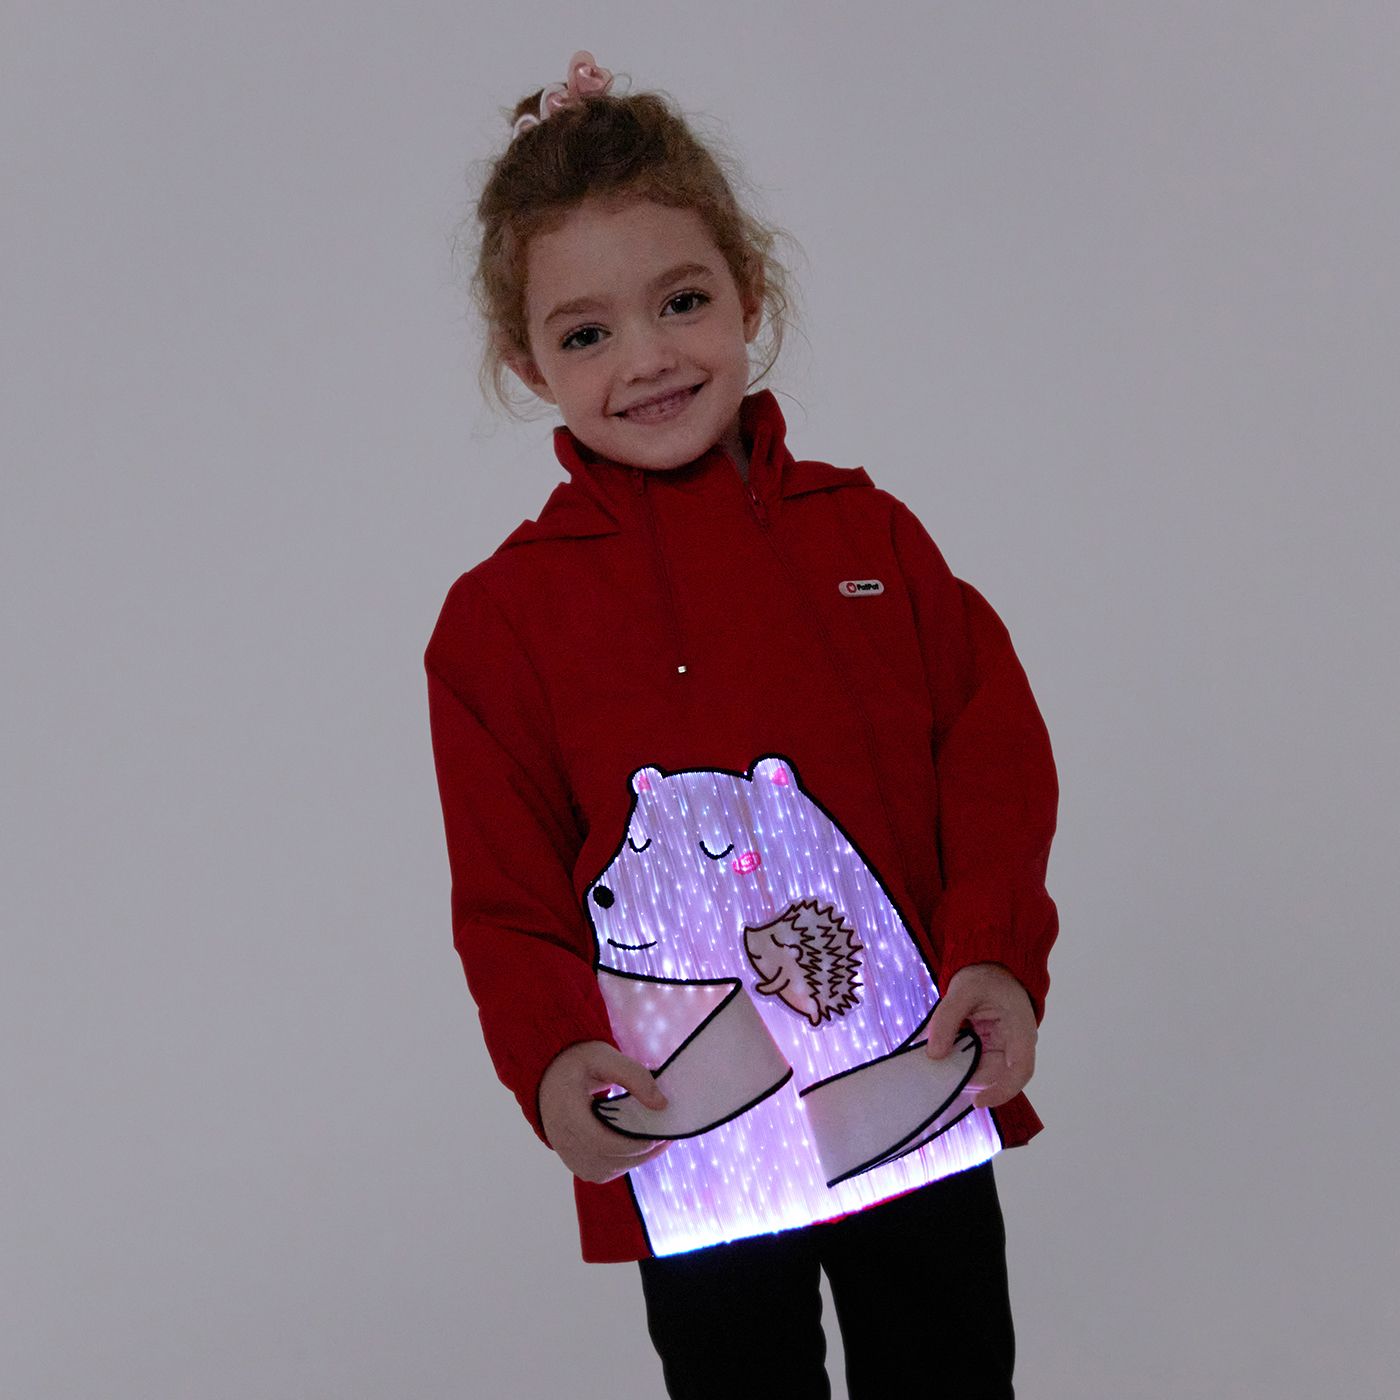 Go-Glow Illuminating Jacket With Light Up Hug Bear Including Controller (Built-In Battery)